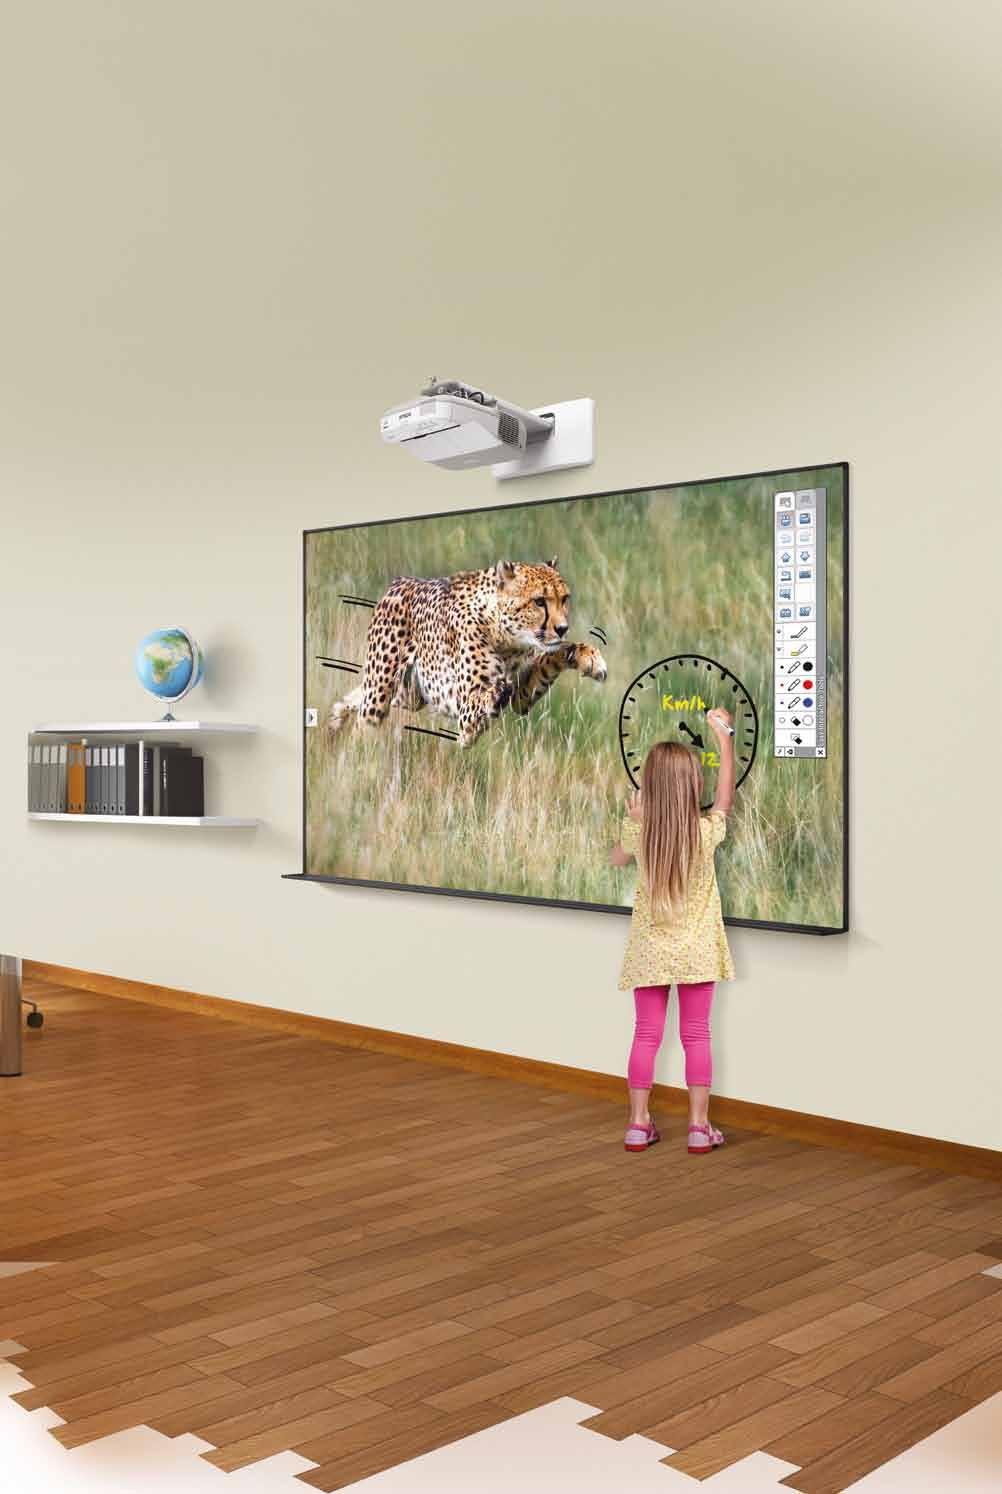 Epson Projectors for Education ATTENTION